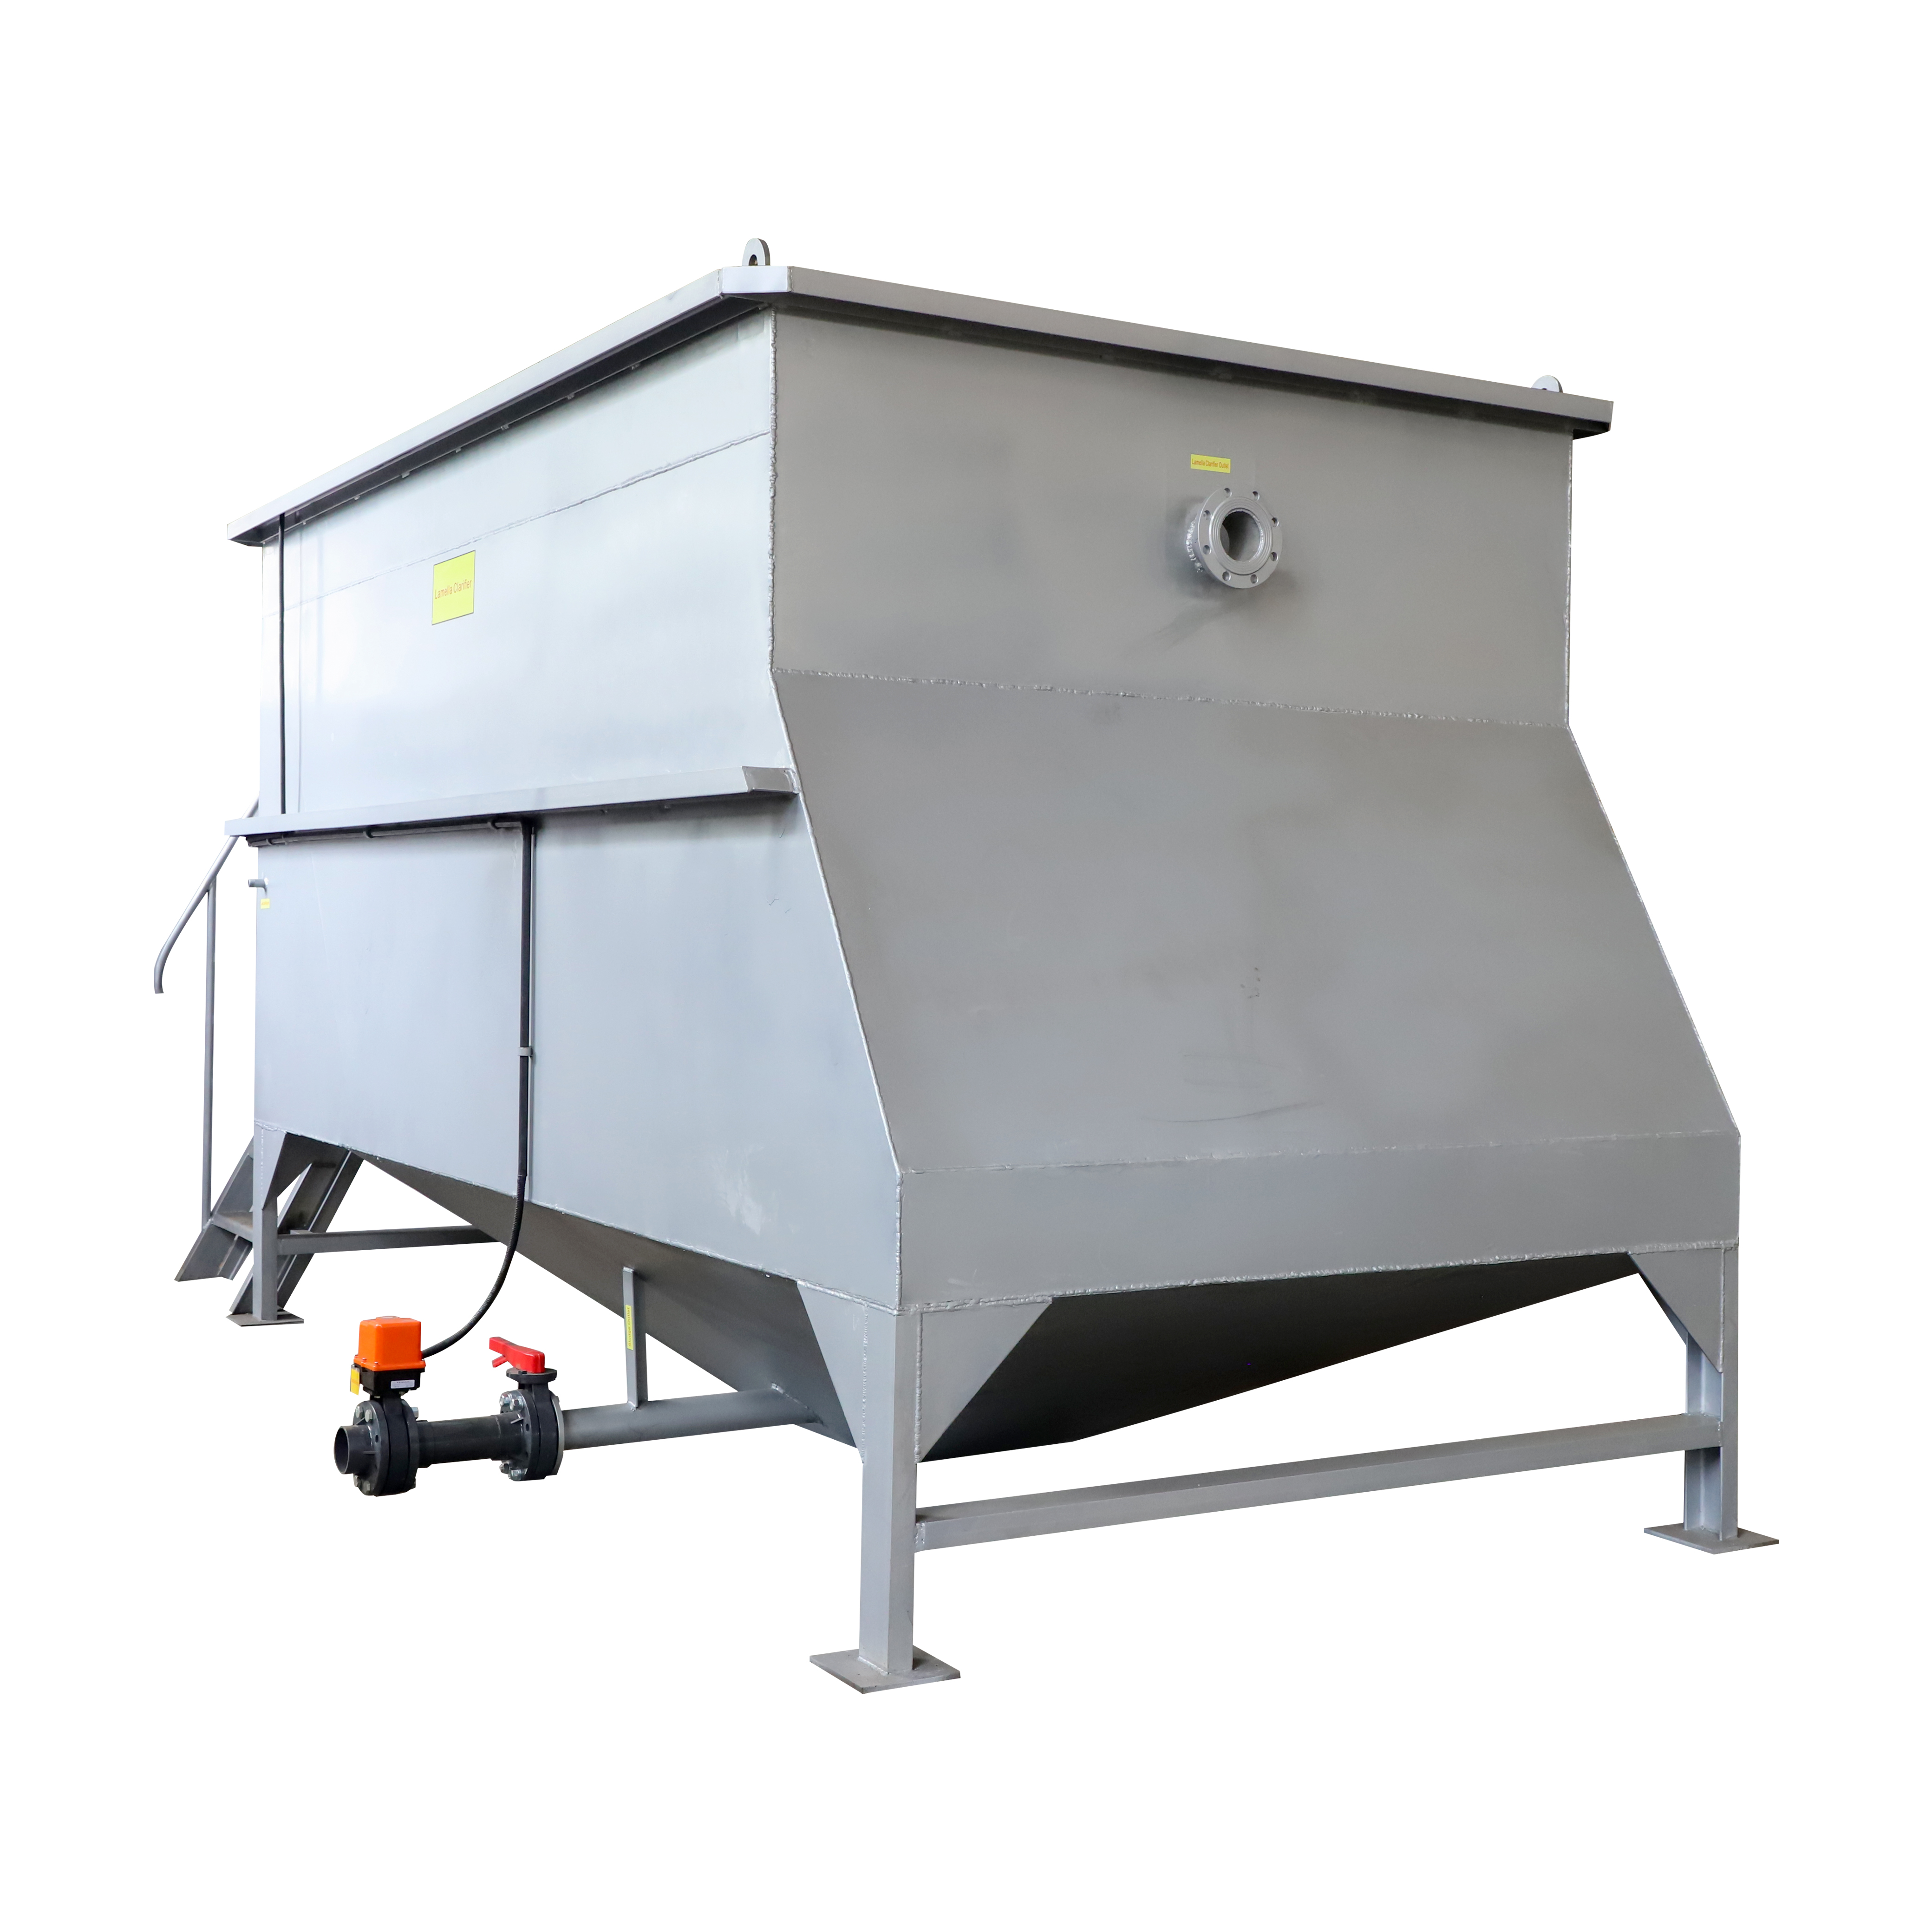 inclined plate clarifier for sale, inclined plate clarifier plant, slant plate clarifier